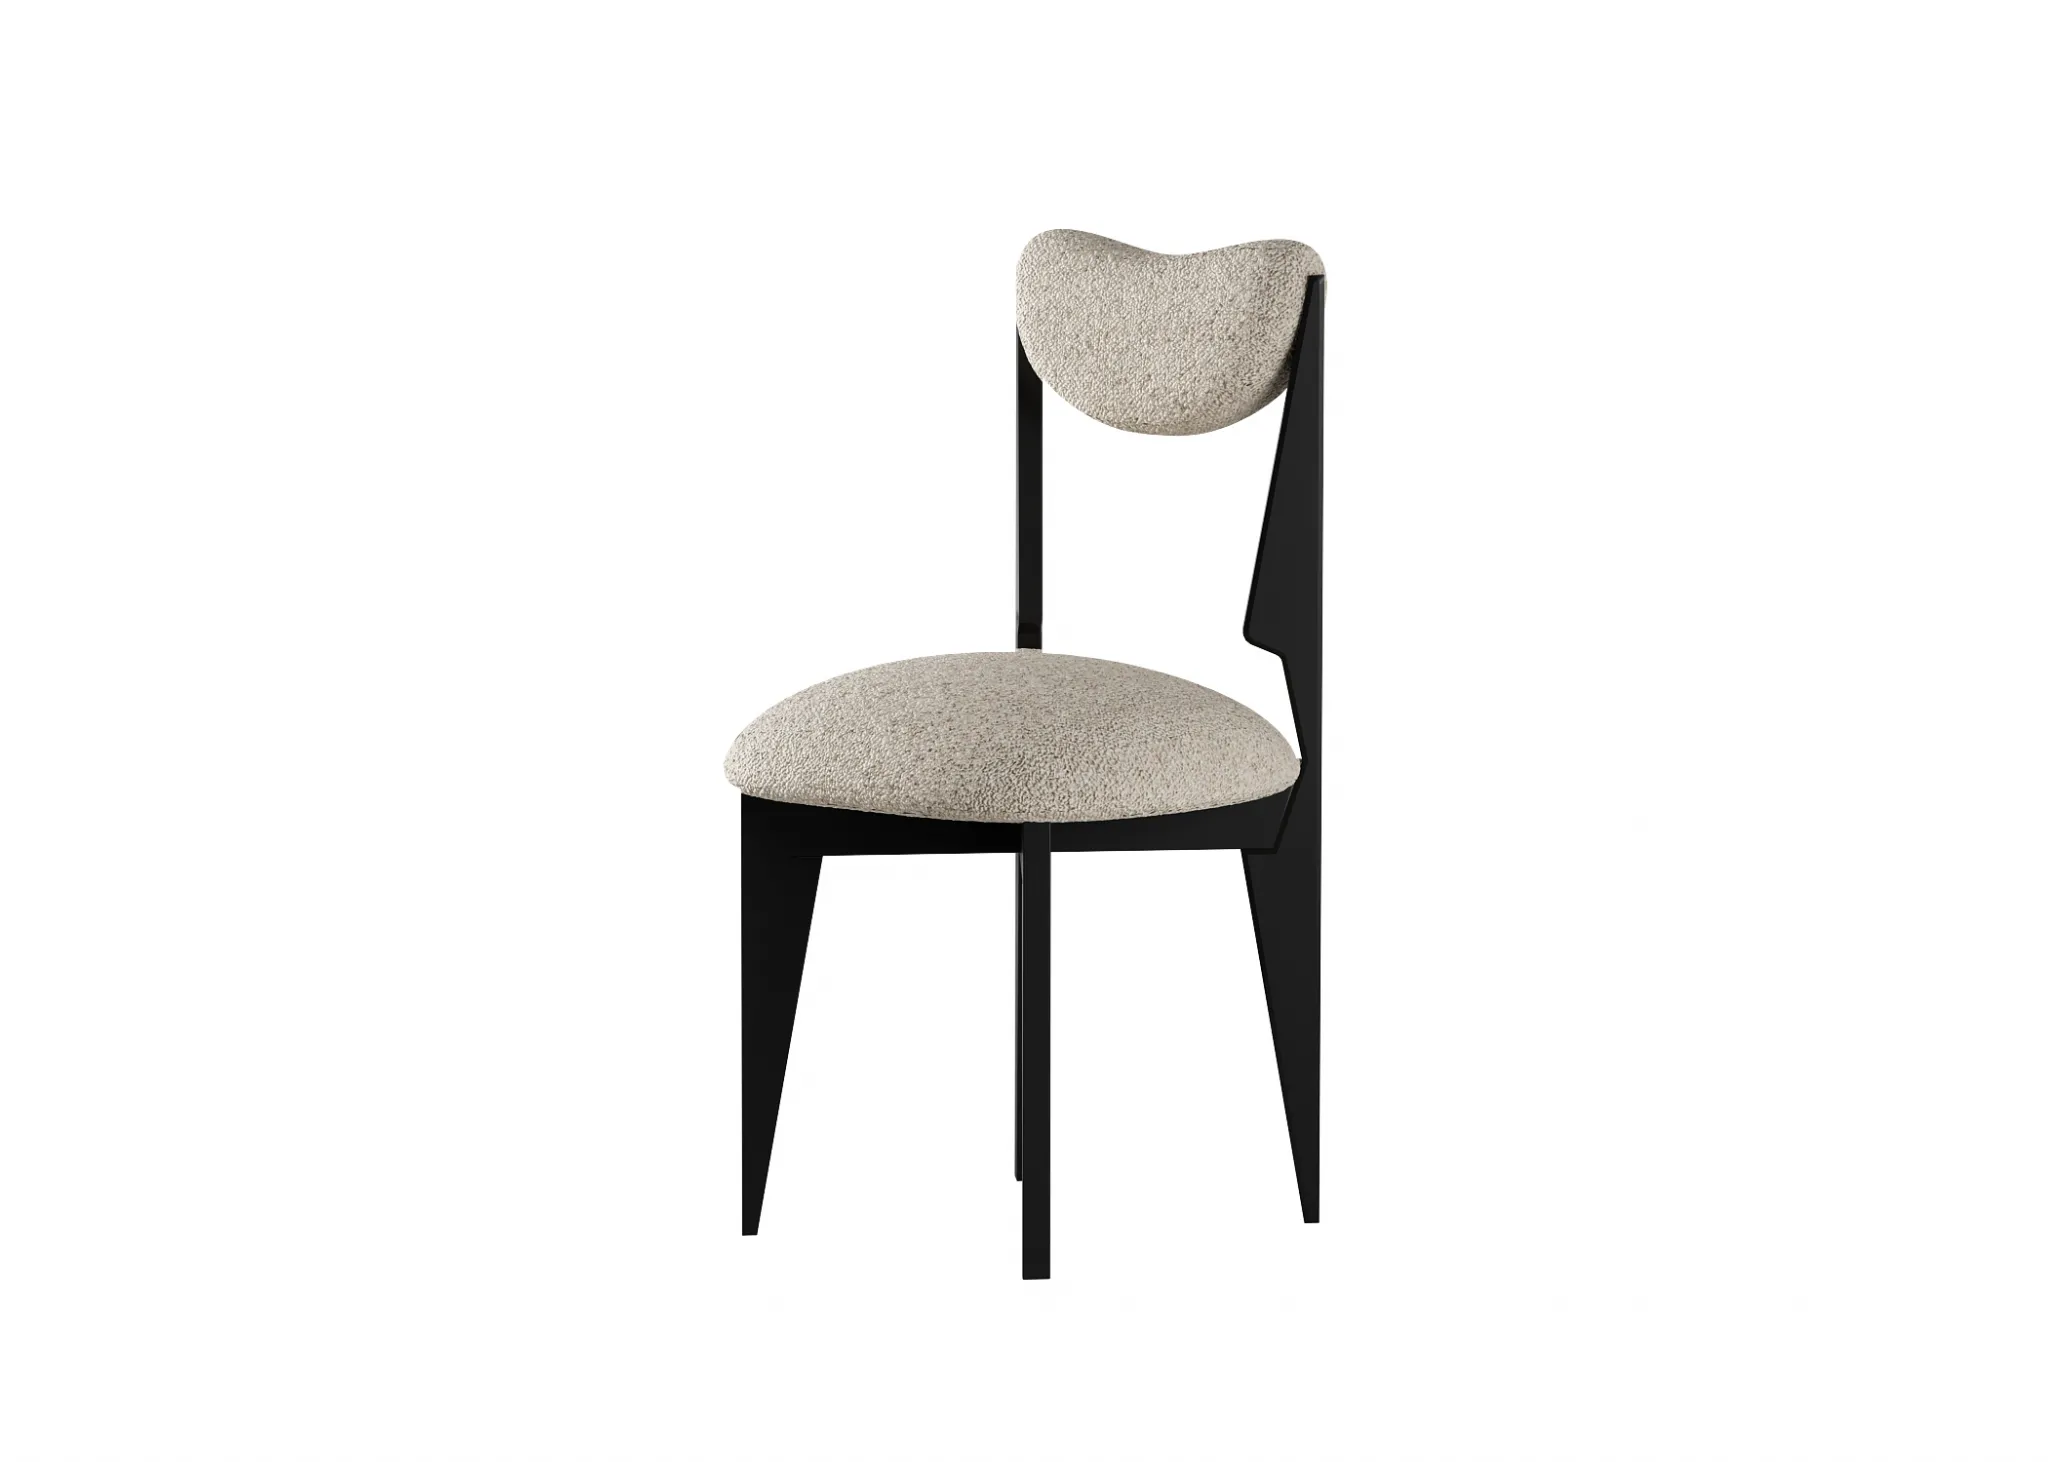 FURNITURE 3D MODELS – CHAIRS – 0026